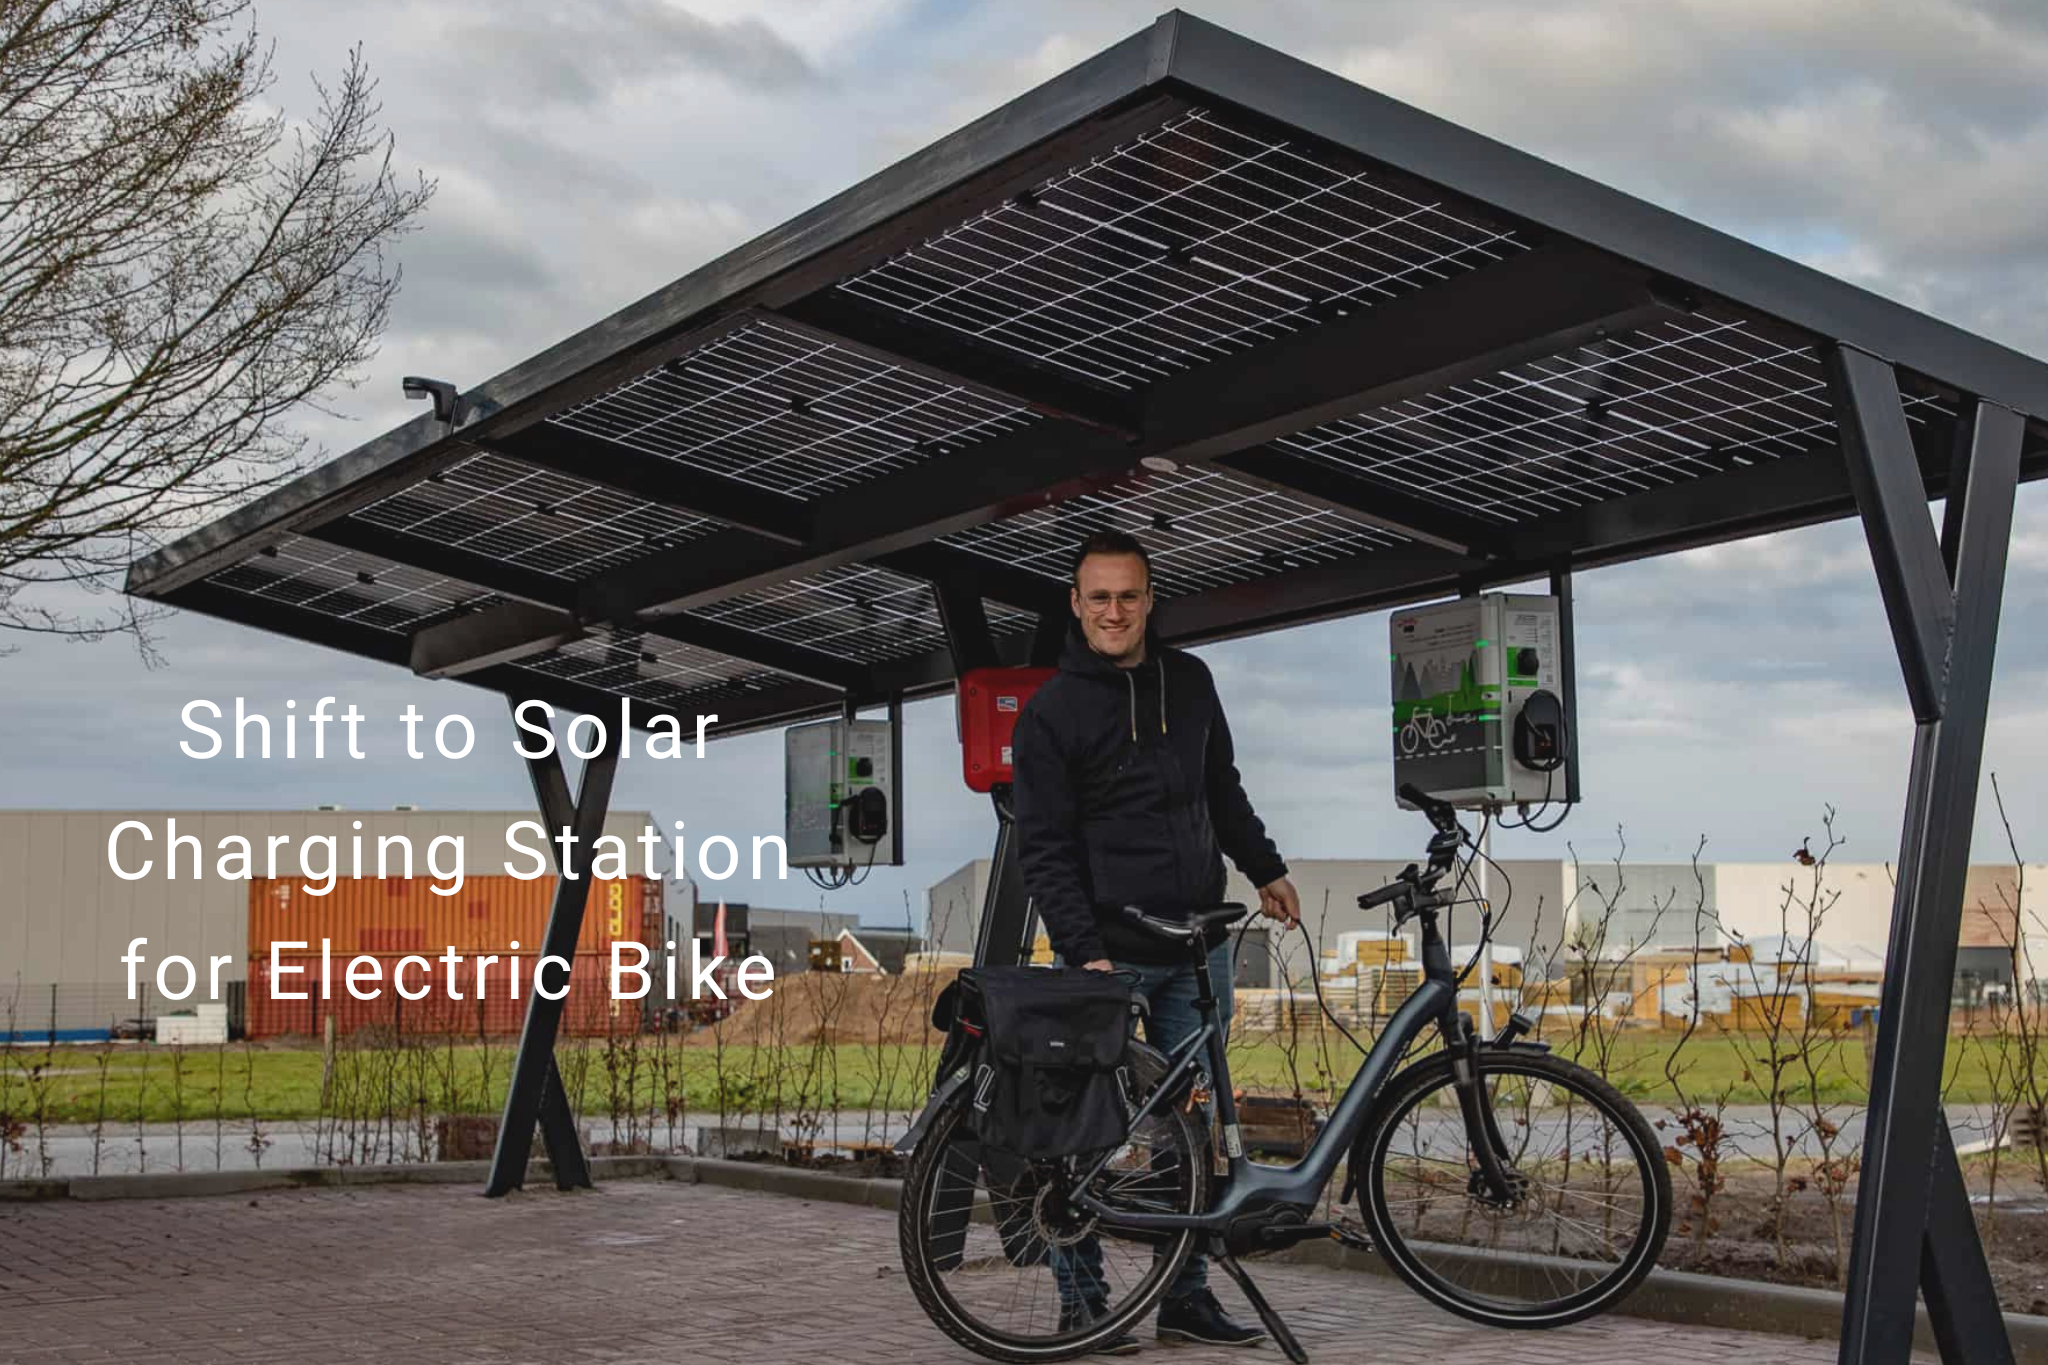 Shift to Solar Develops Universal Charging Station for Electric Bike